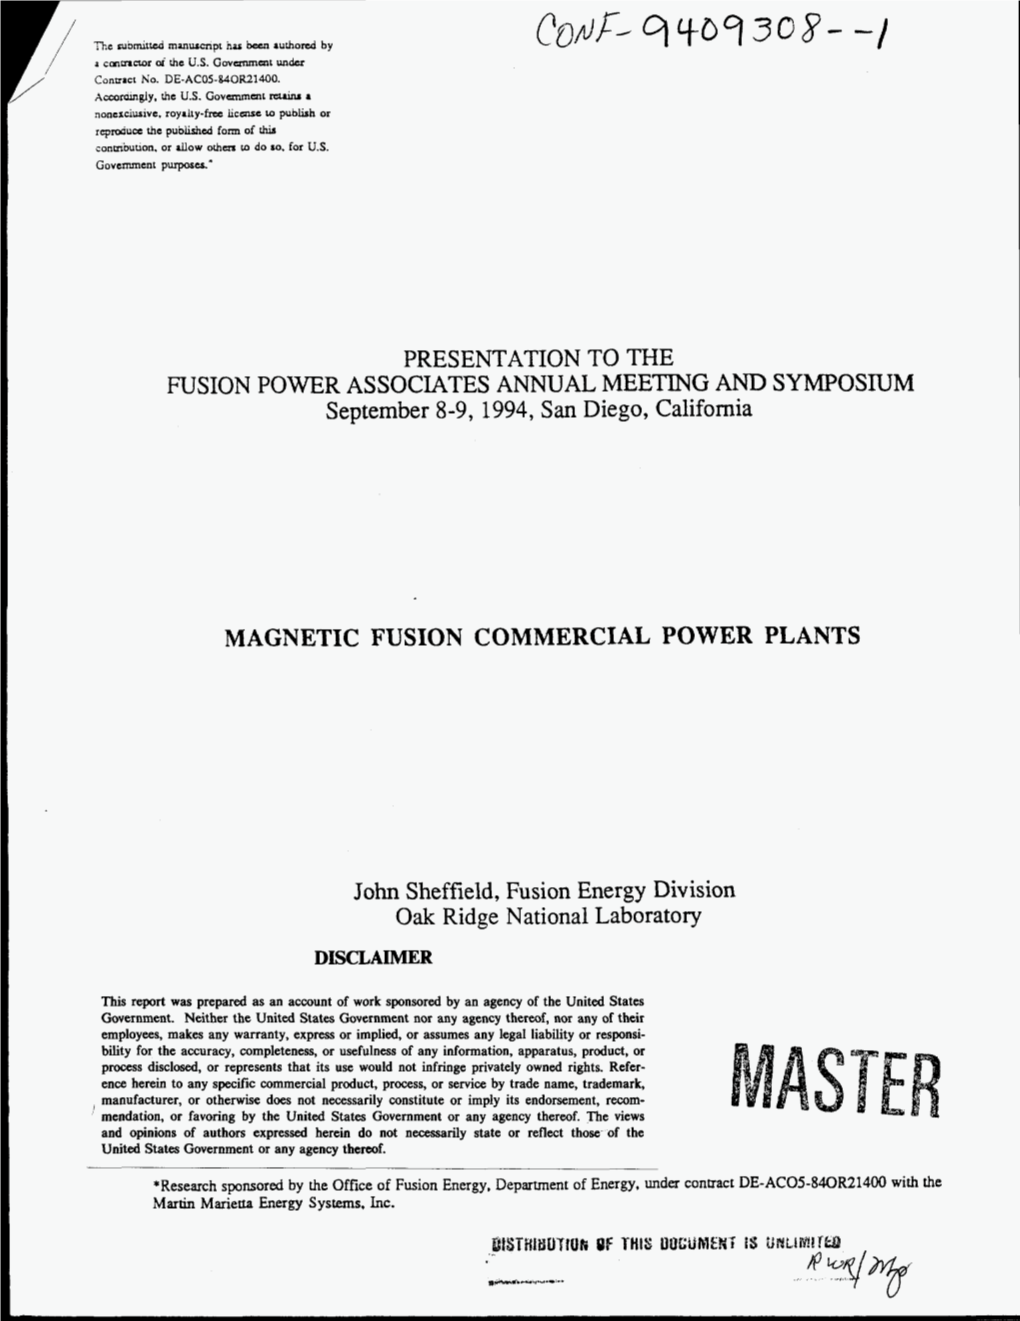 Magnetic Fusion Commercial Power Plants